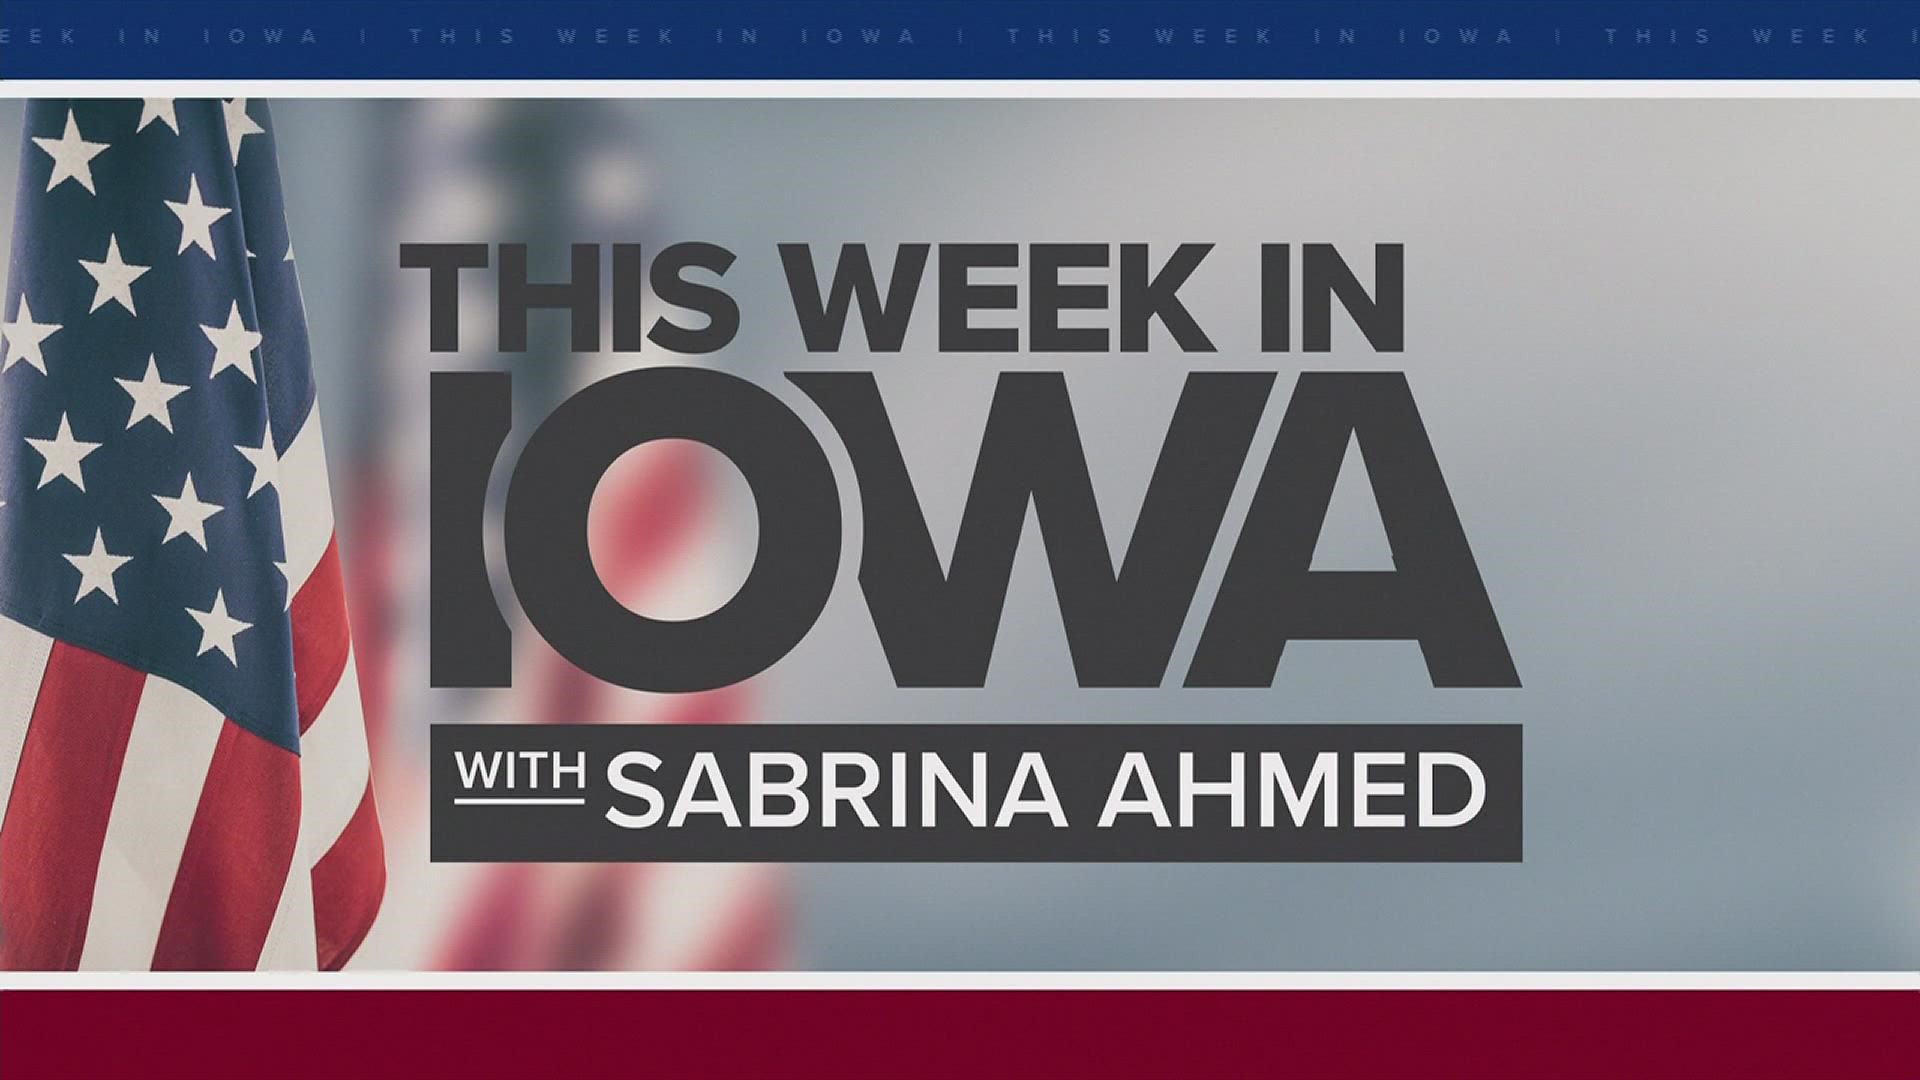 You can watch "This Week in Iowa" every Sunday at 9 a.m. on Local 5 or WeAreIowa.com/Watch.